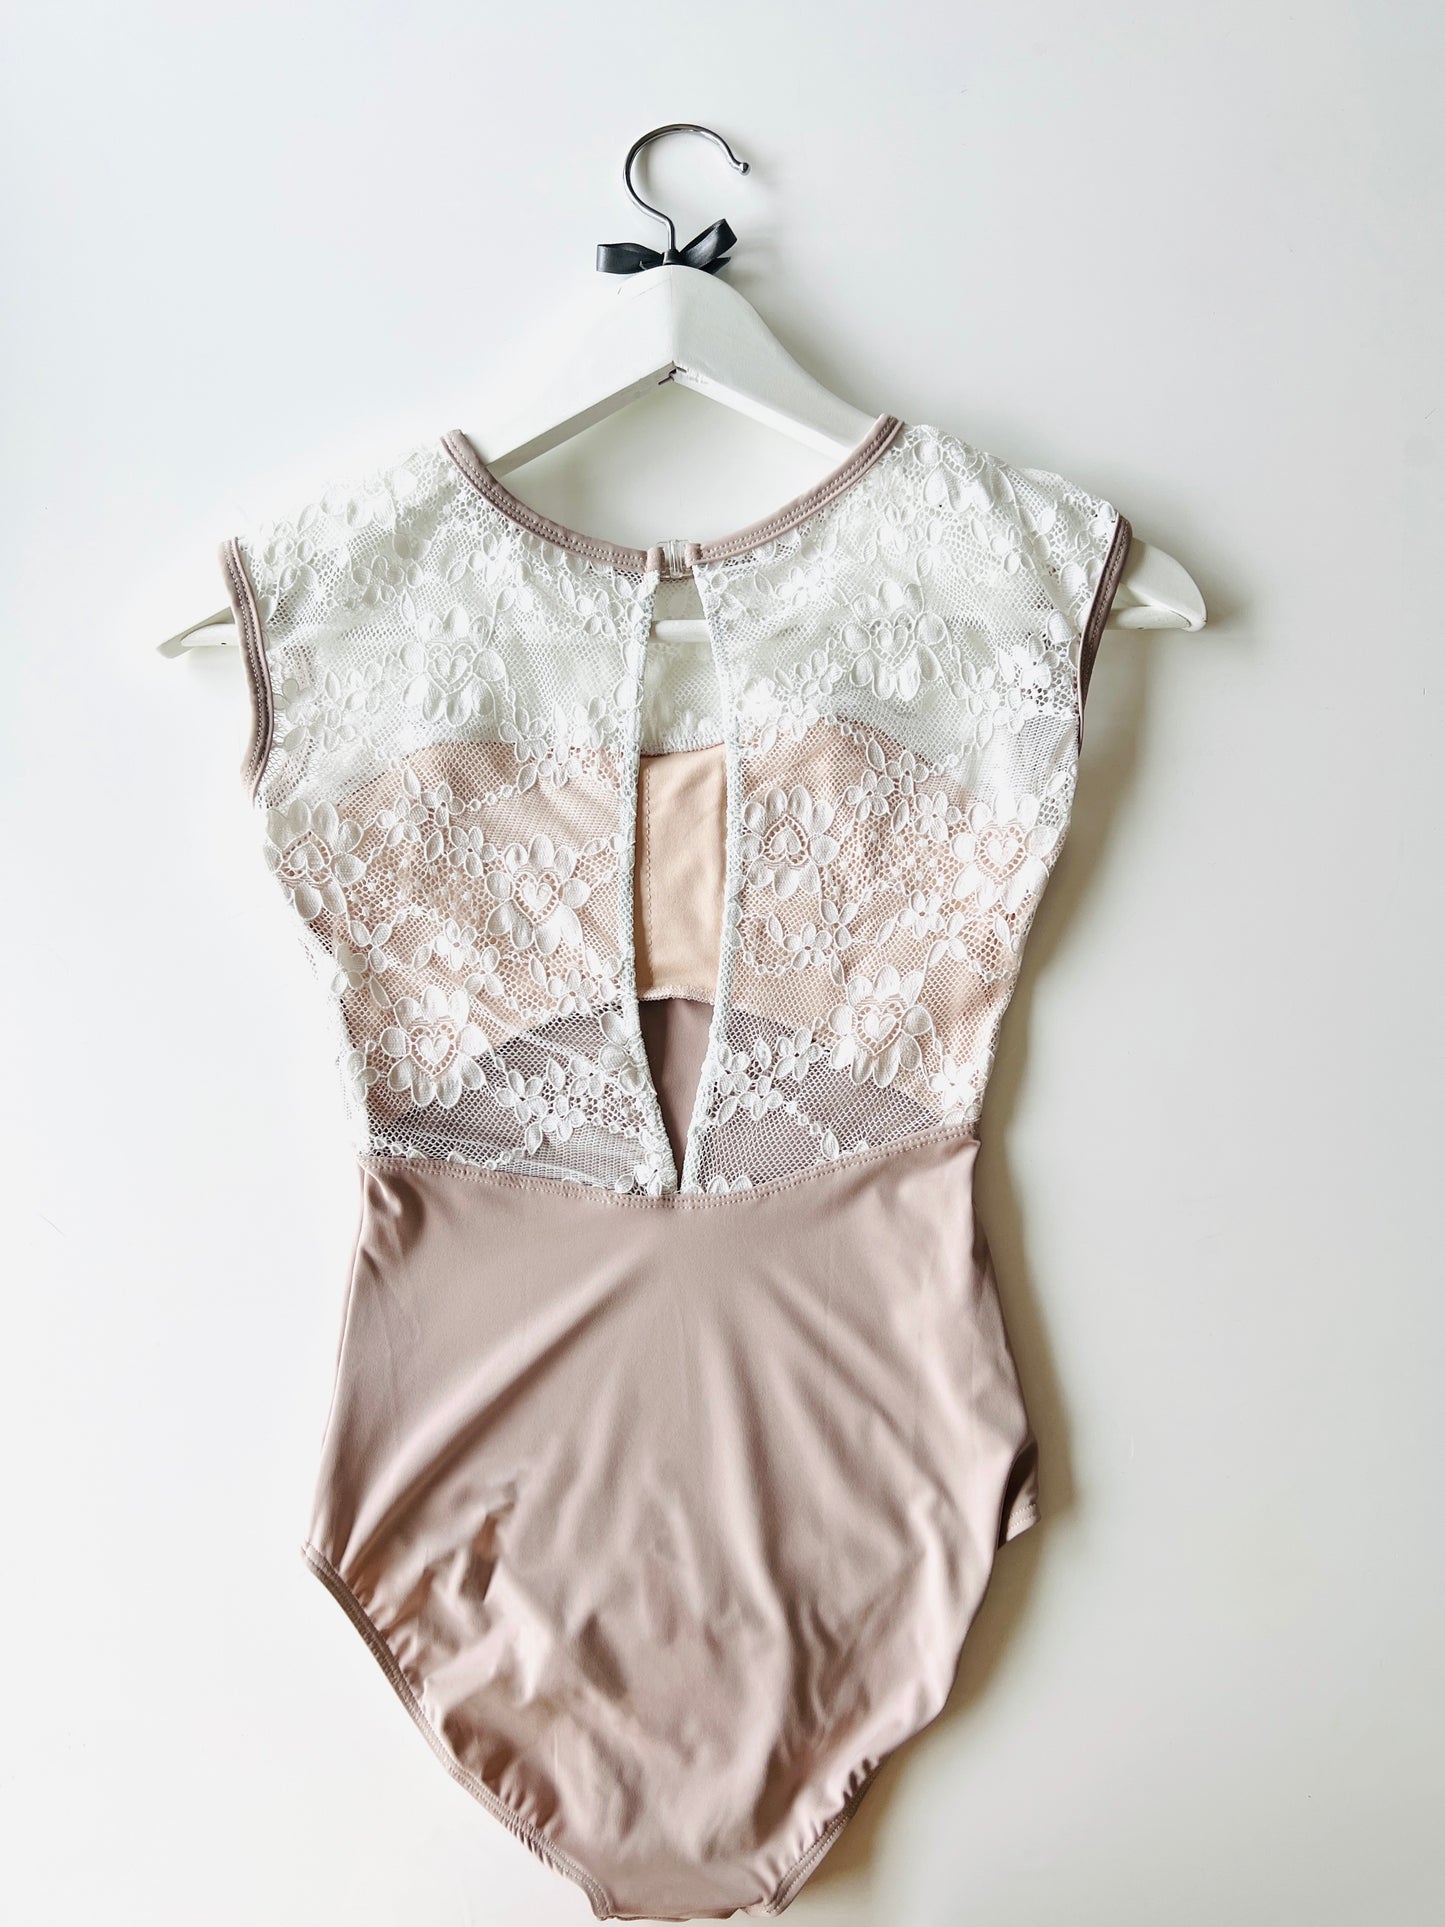 Lace cap sleeve leotard in dusky pink from the collective Dancewear